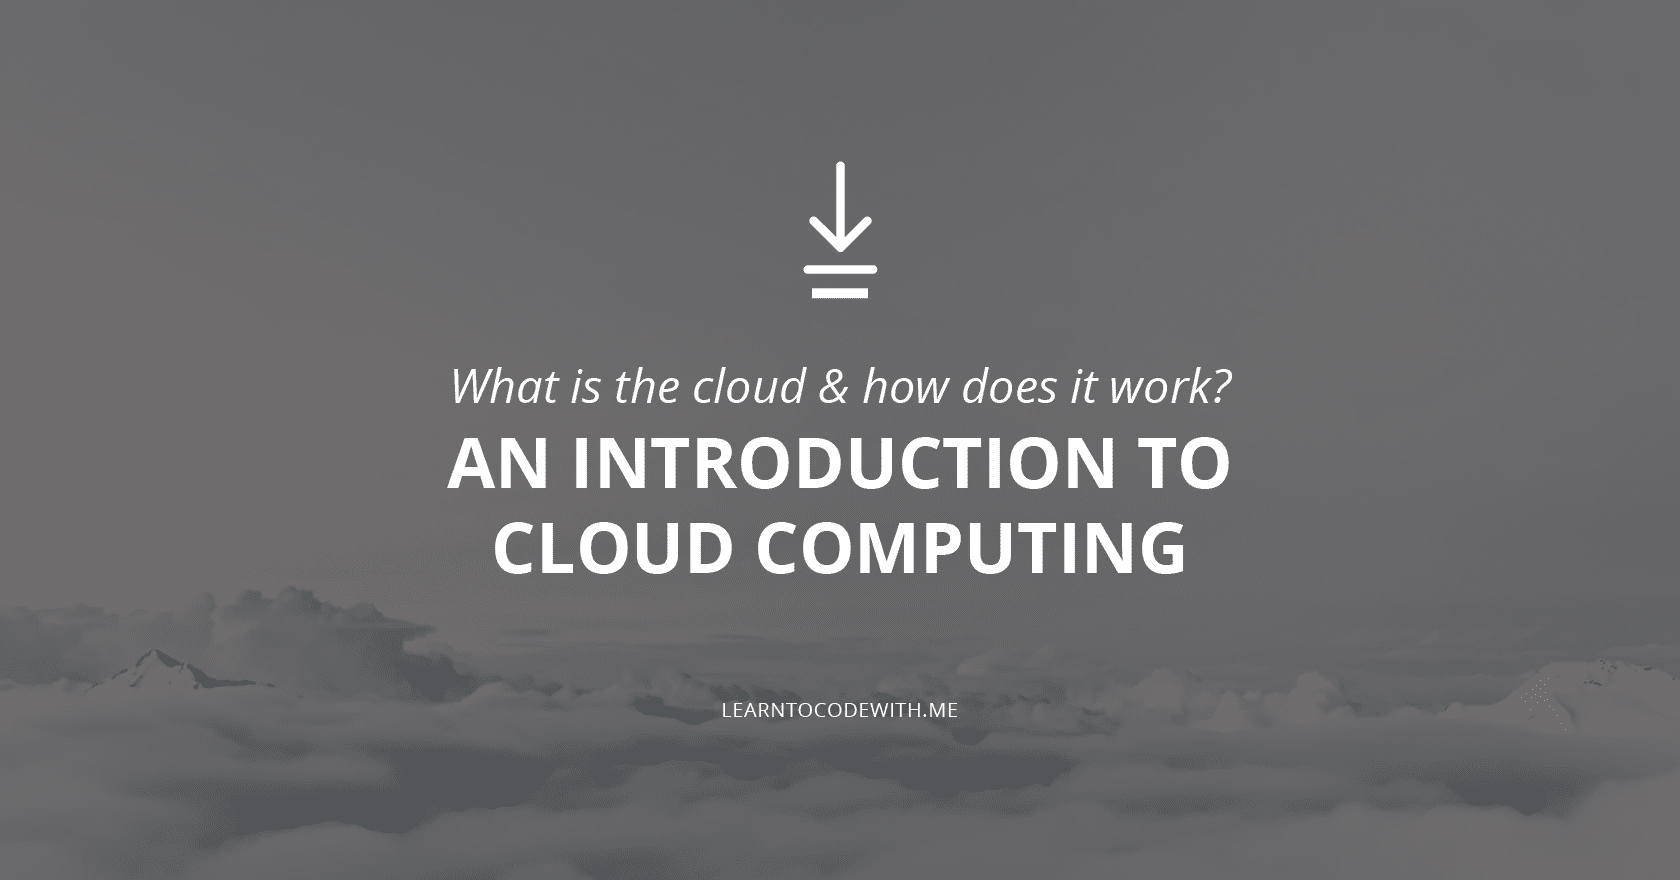 Introduction to cloud computing